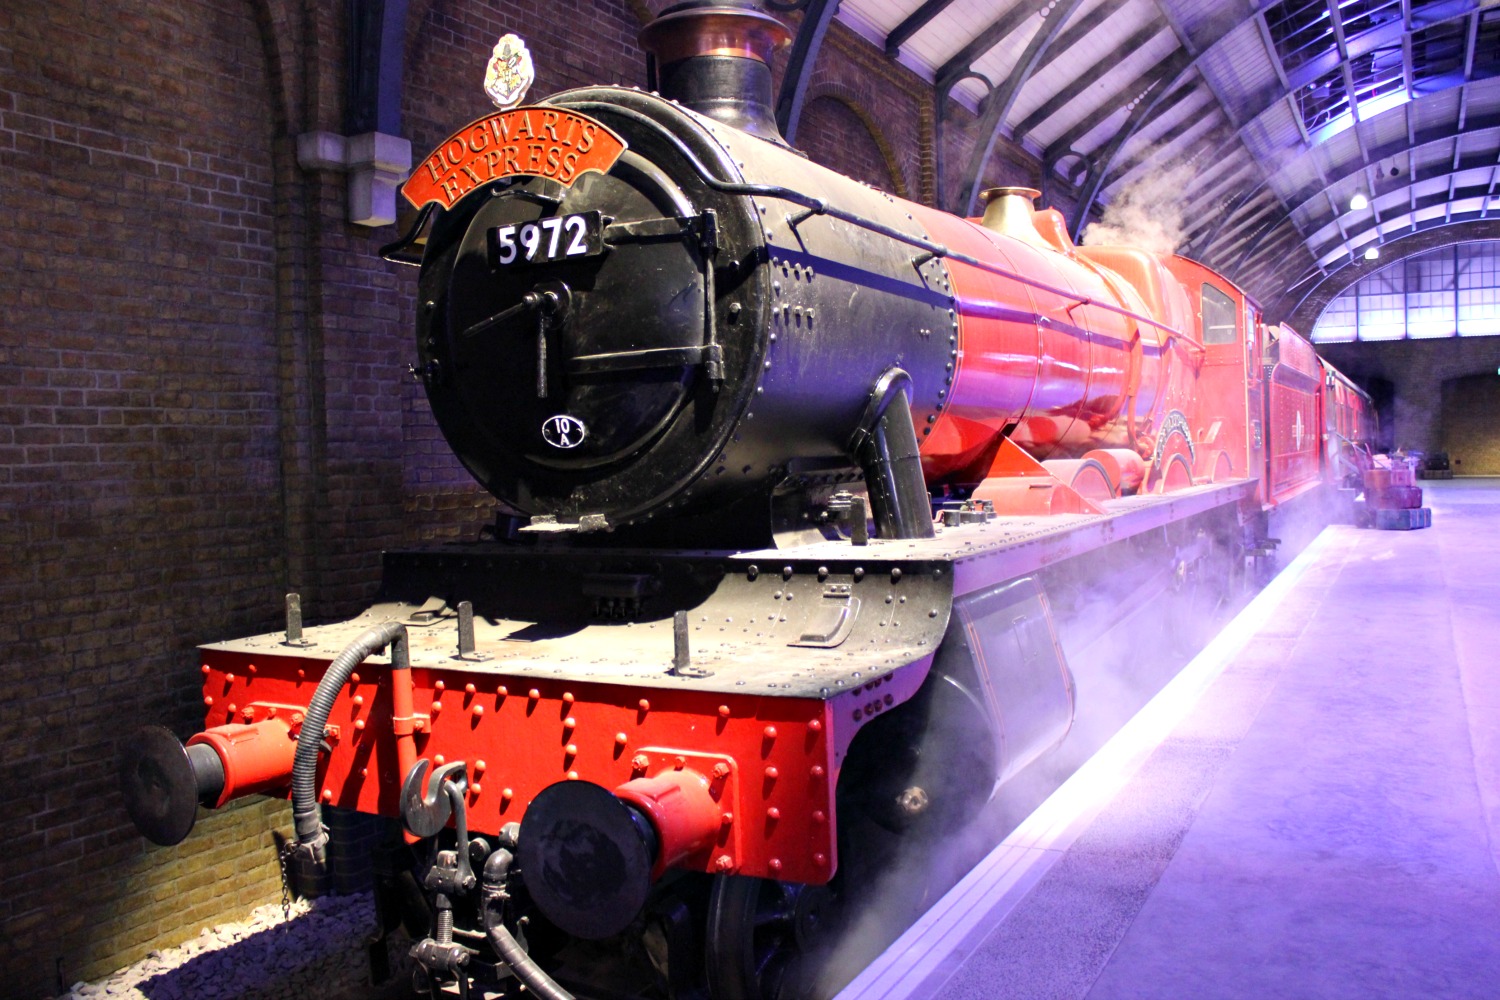 The Hogwarts Express at the Warner Bros Studio tour in Hertfordshire - let literature inspire you with my top 21 days out with kids who love books